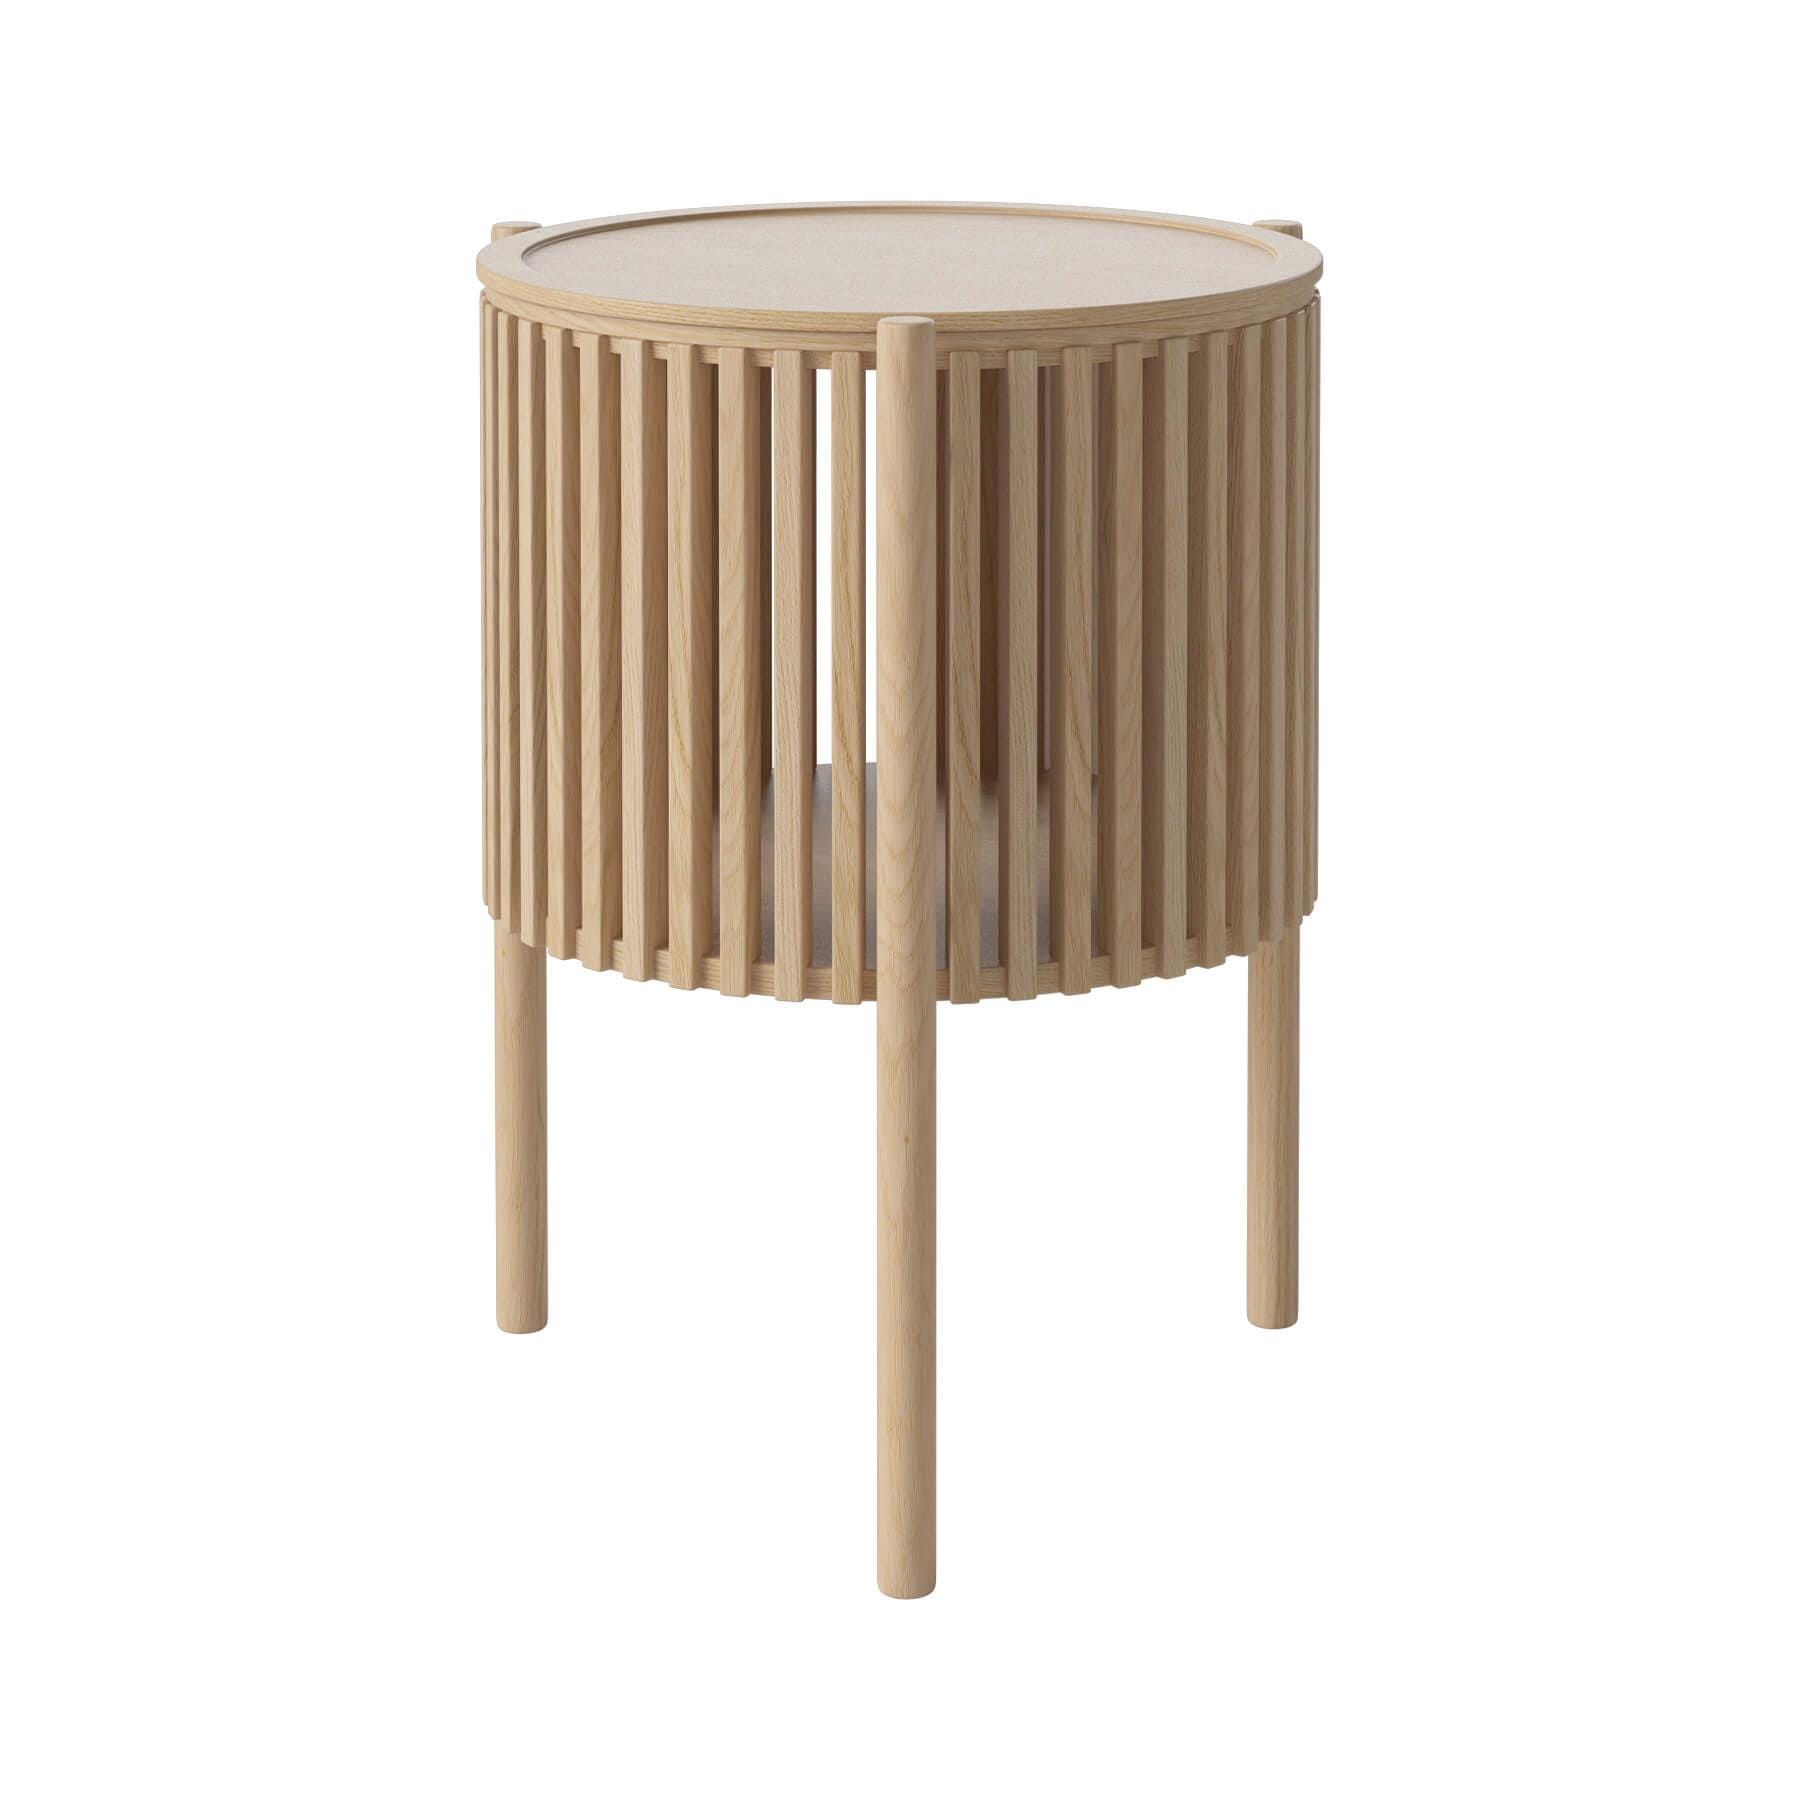 Bolia Story Side Table White Oiled Oak Light Wood Designer Furniture From Holloways Of Ludlow